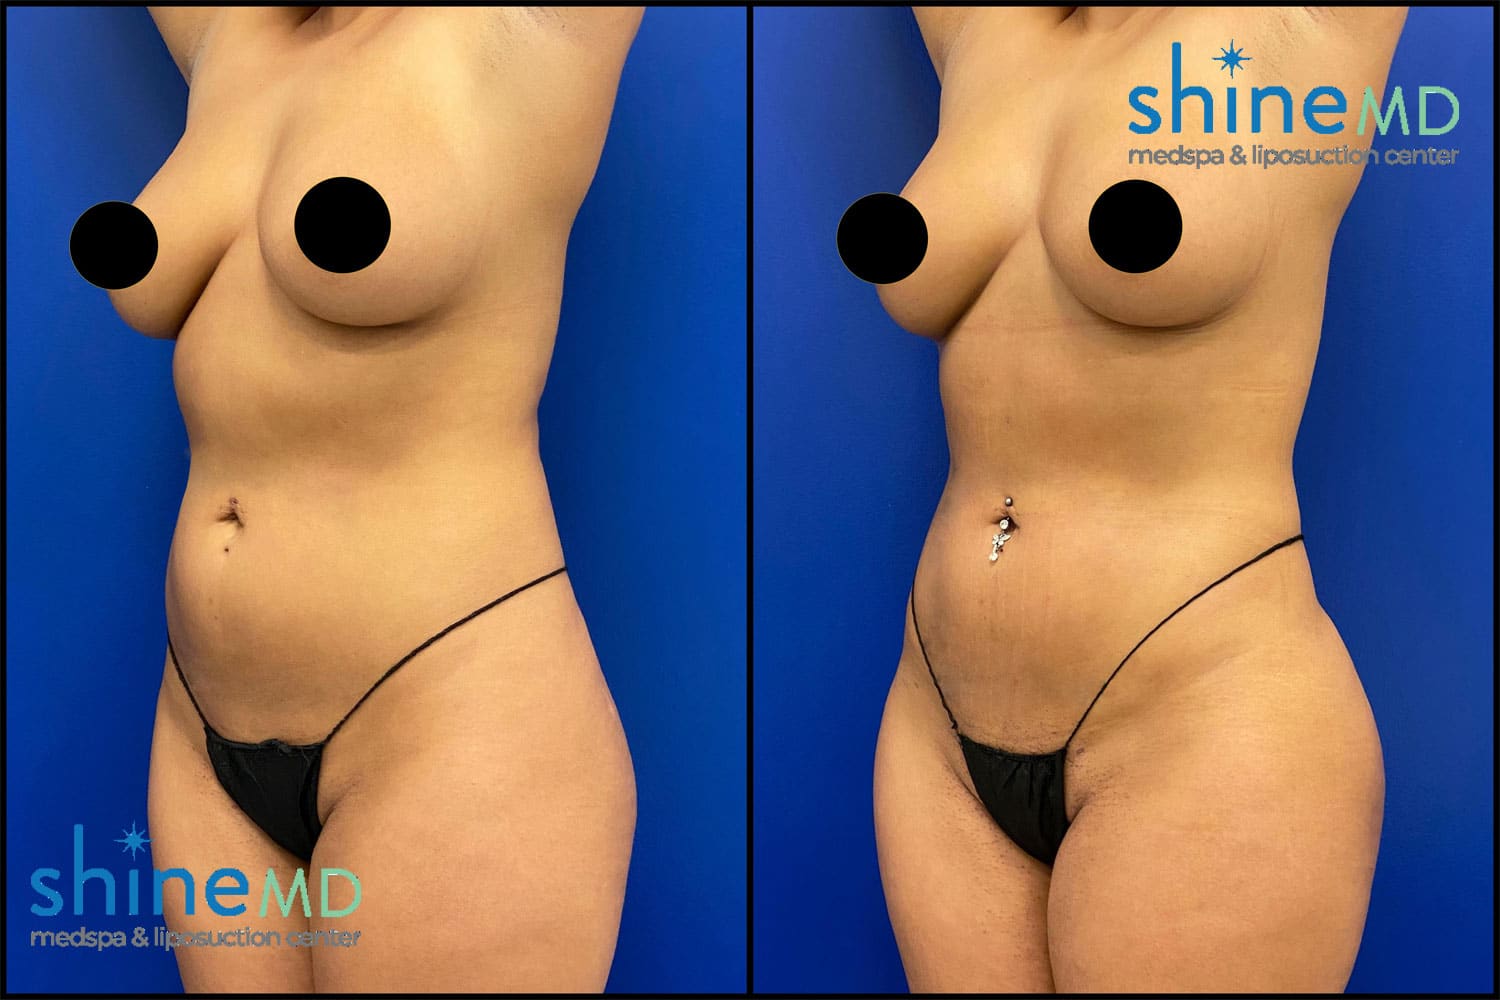 Lipo360 with BBL Photo of ShineMD